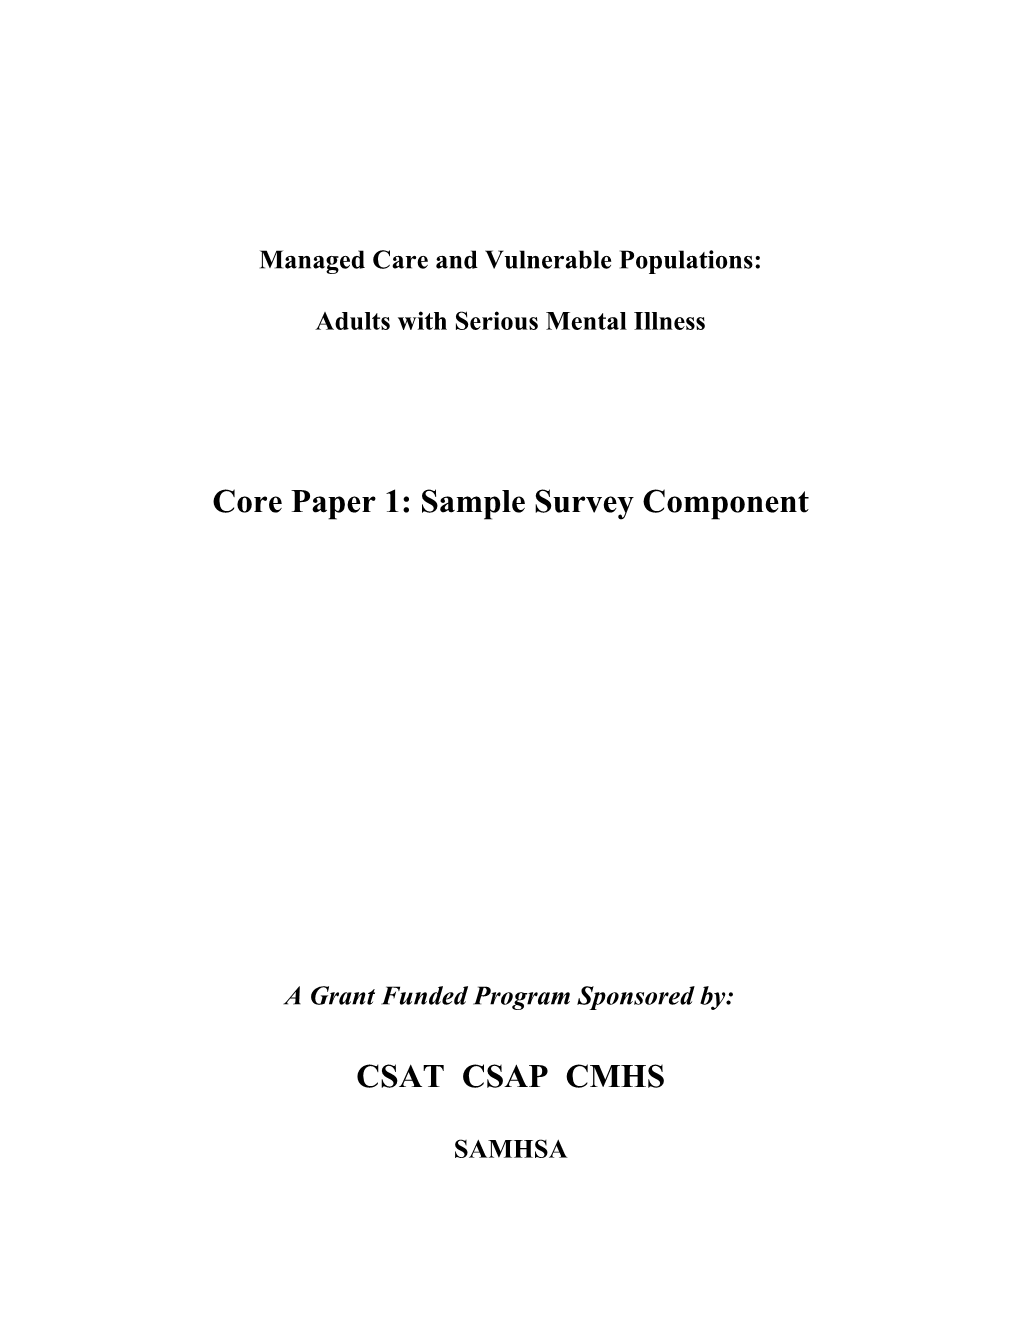 Managed Care and Vulnerable Populations